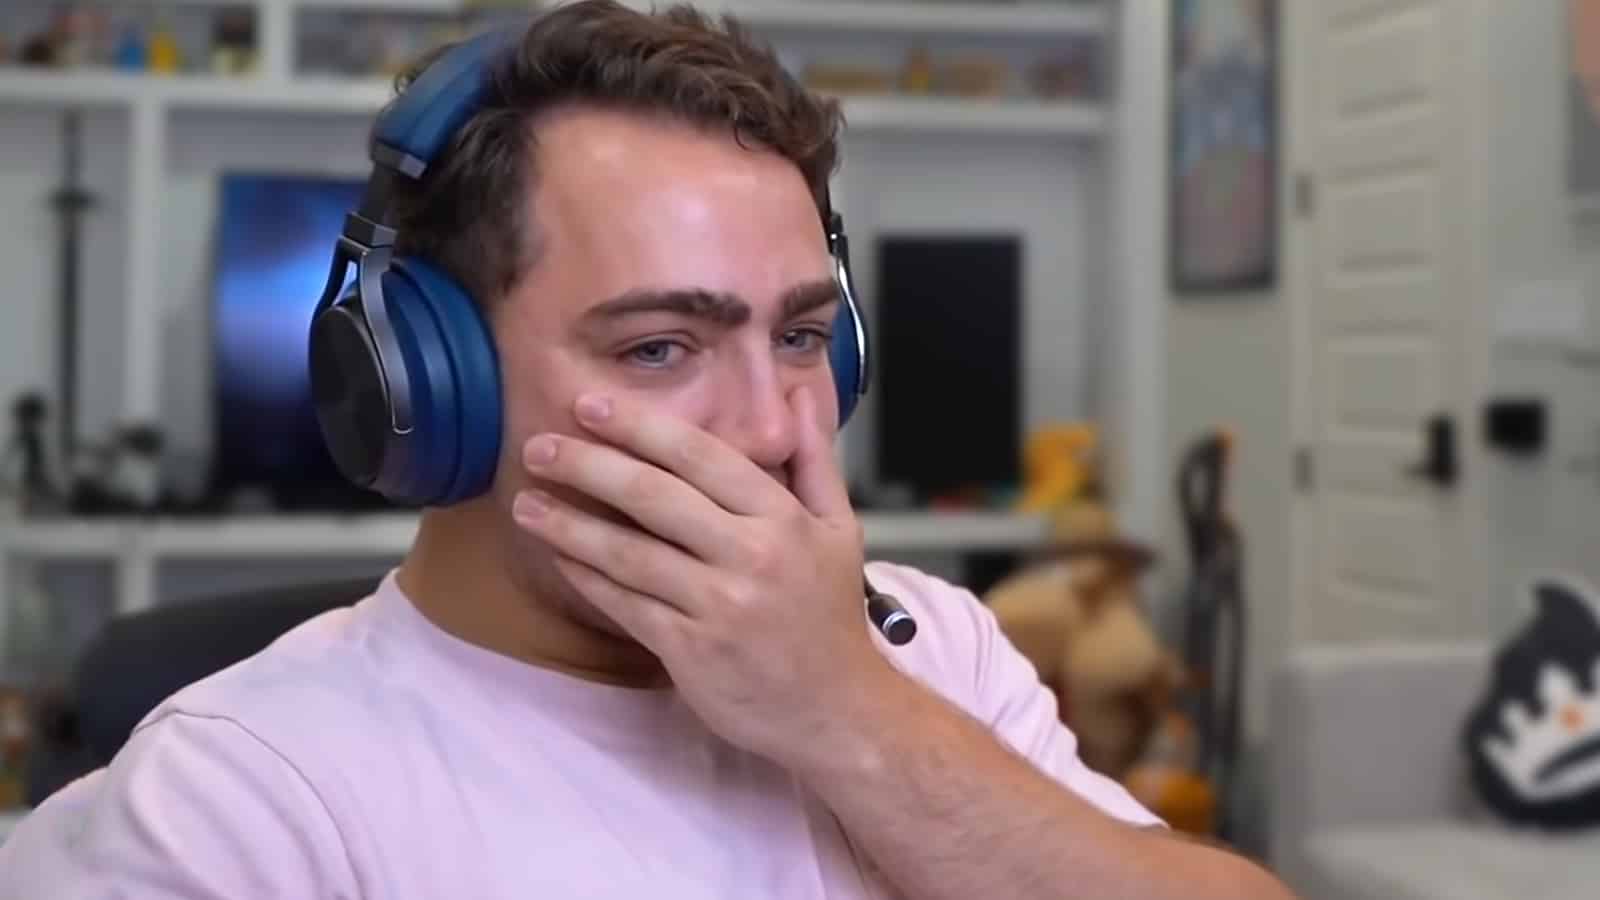 The 26-year-old stream star was reduced to tears early on his Twitch return.